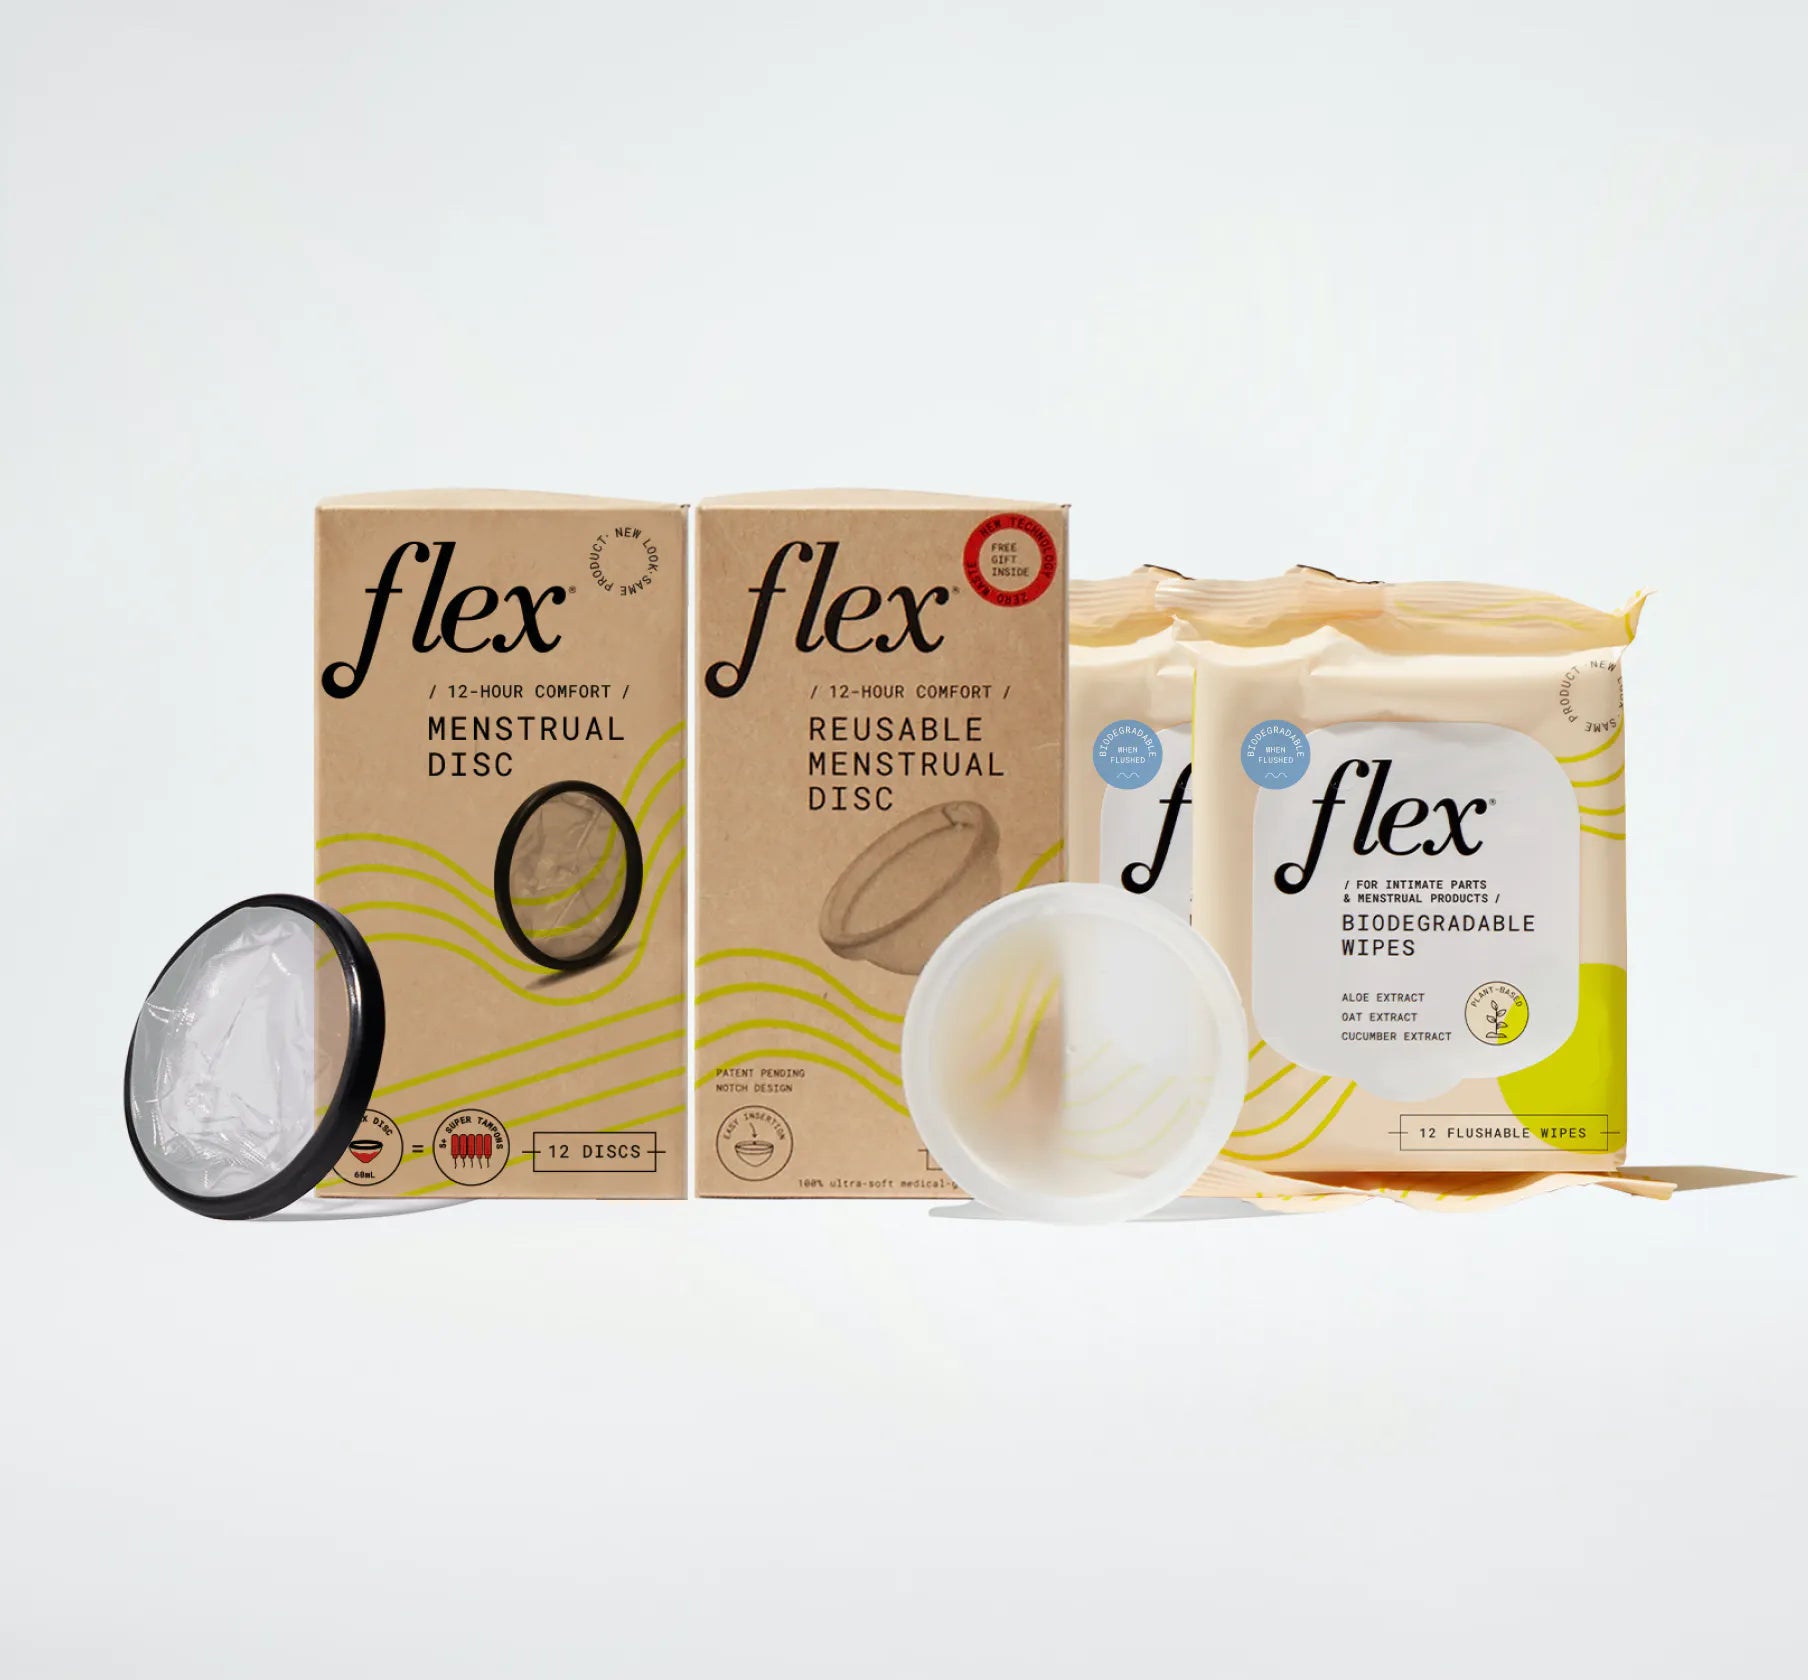 Flex Period Kit with a disposable and a reusable menstrual disc plus biodegradable wipes